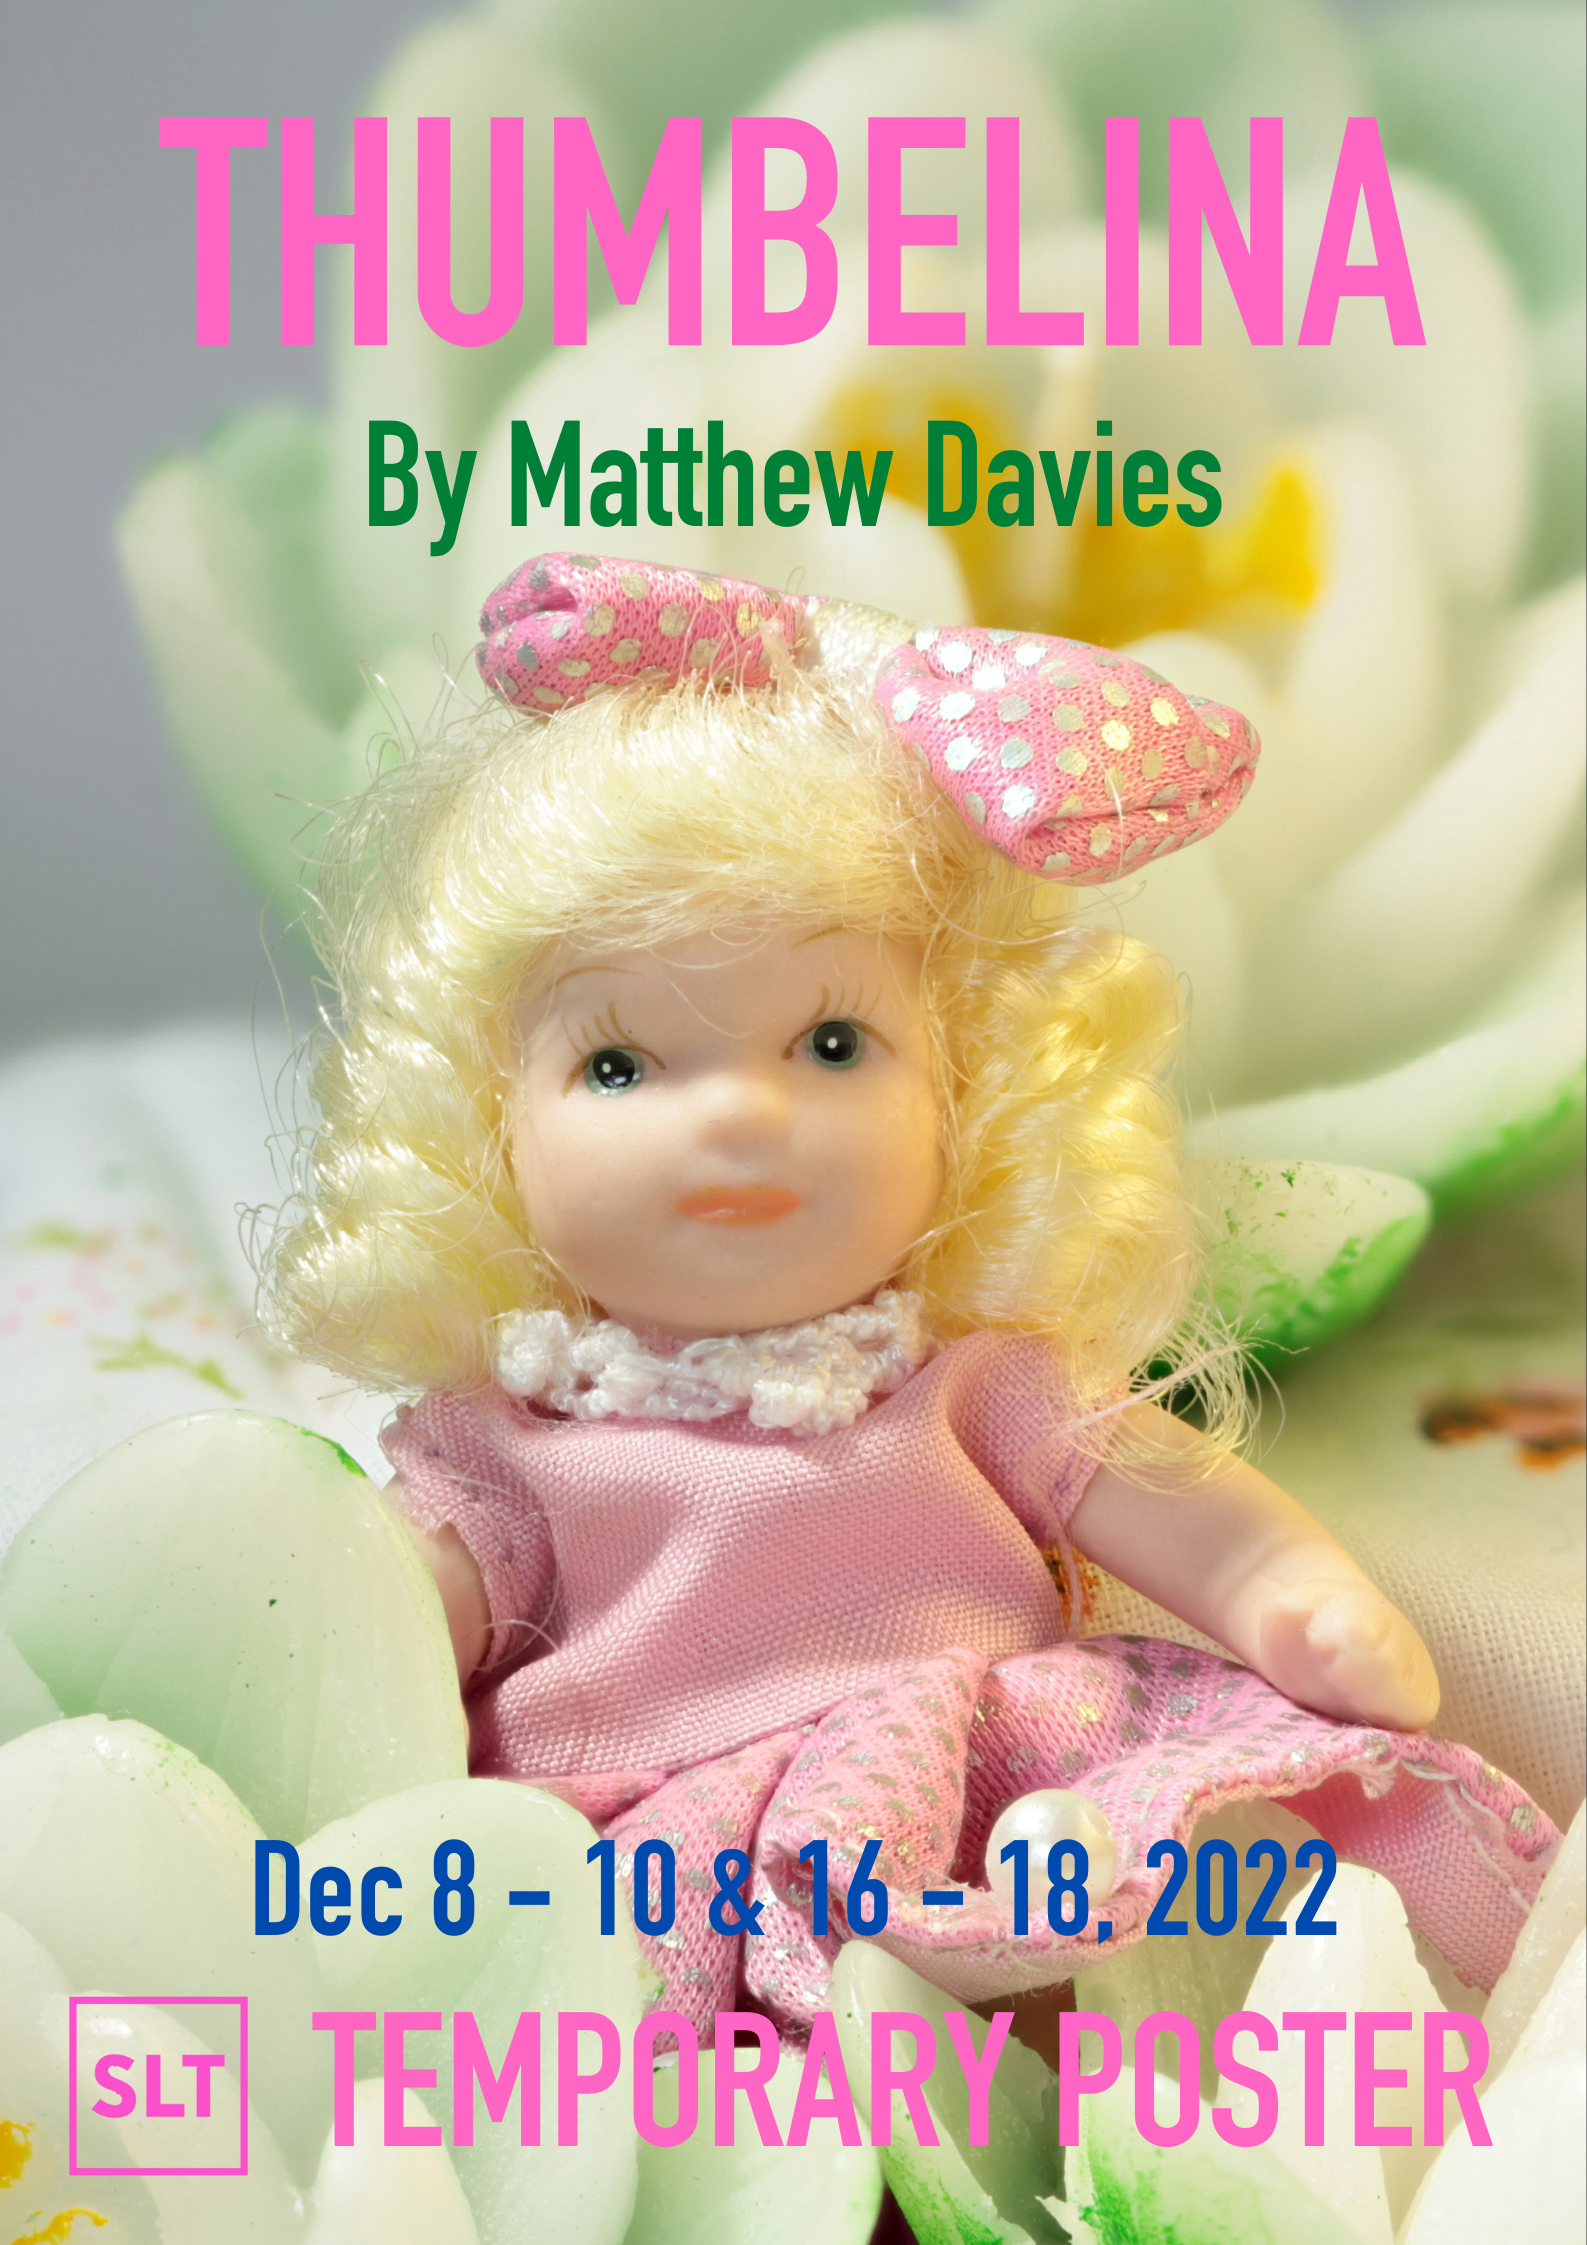 Temporary poster for Thumbelina: Photo of a small doll dressed in pink and sitting amongst green leaves and flowers